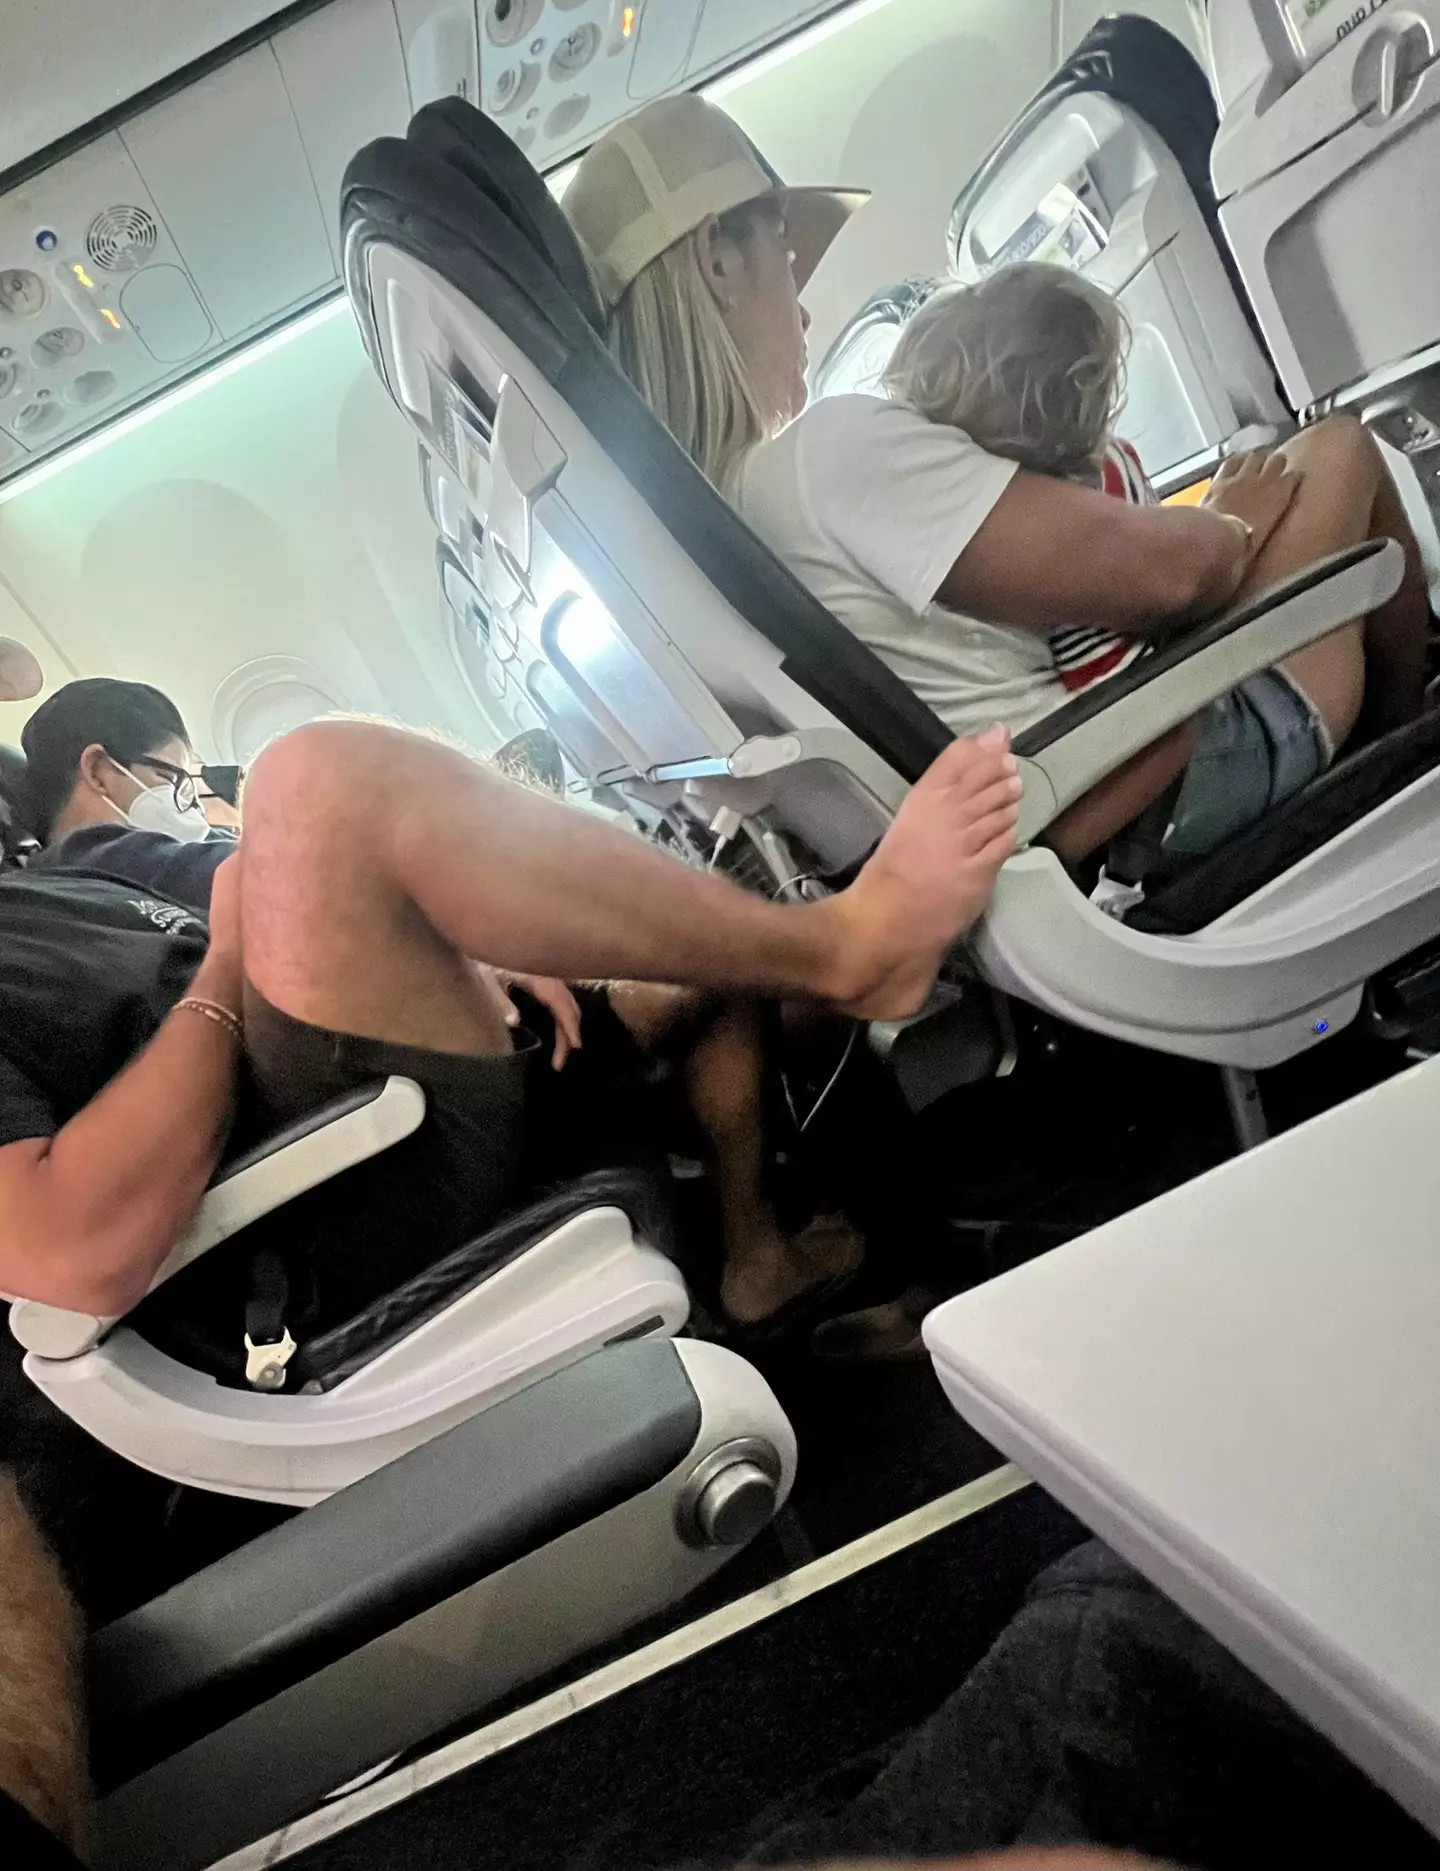 What would you do if this happened on your flight?